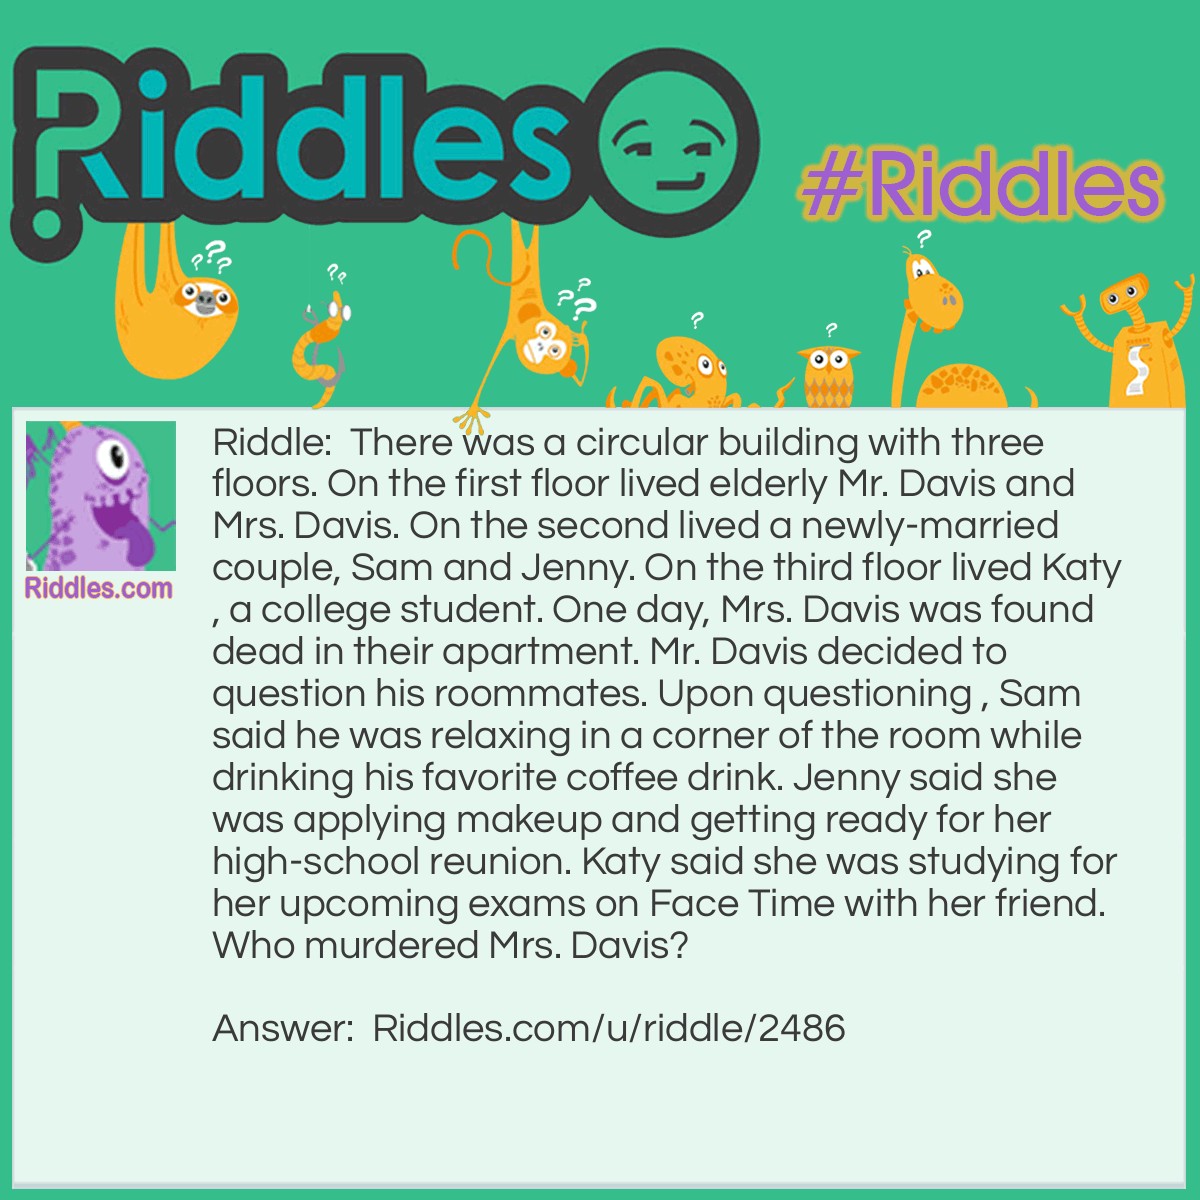 Riddle: There was a circular building with three floors. On the first floor lived elderly Mr. Davis and Mrs. Davis. On the second lived a newly-married couple, Sam and Jenny. On the third floor lived Katy, a college student. One day, Mrs. Davis was found dead in their apartment. Mr. Davis decided to question his roommates. Upon questioning , Sam said he was relaxing in a corner of the room while drinking his favorite coffee drink. Jenny said she was applying makeup and getting ready for her high-school reunion. Katy said she was studying for her upcoming exams on Face Time with her friend. Who murdered Mrs. Davis? Answer: Sam was the murderer. He said he was drinking coffee in a corner of the room, but the building was a circular building.